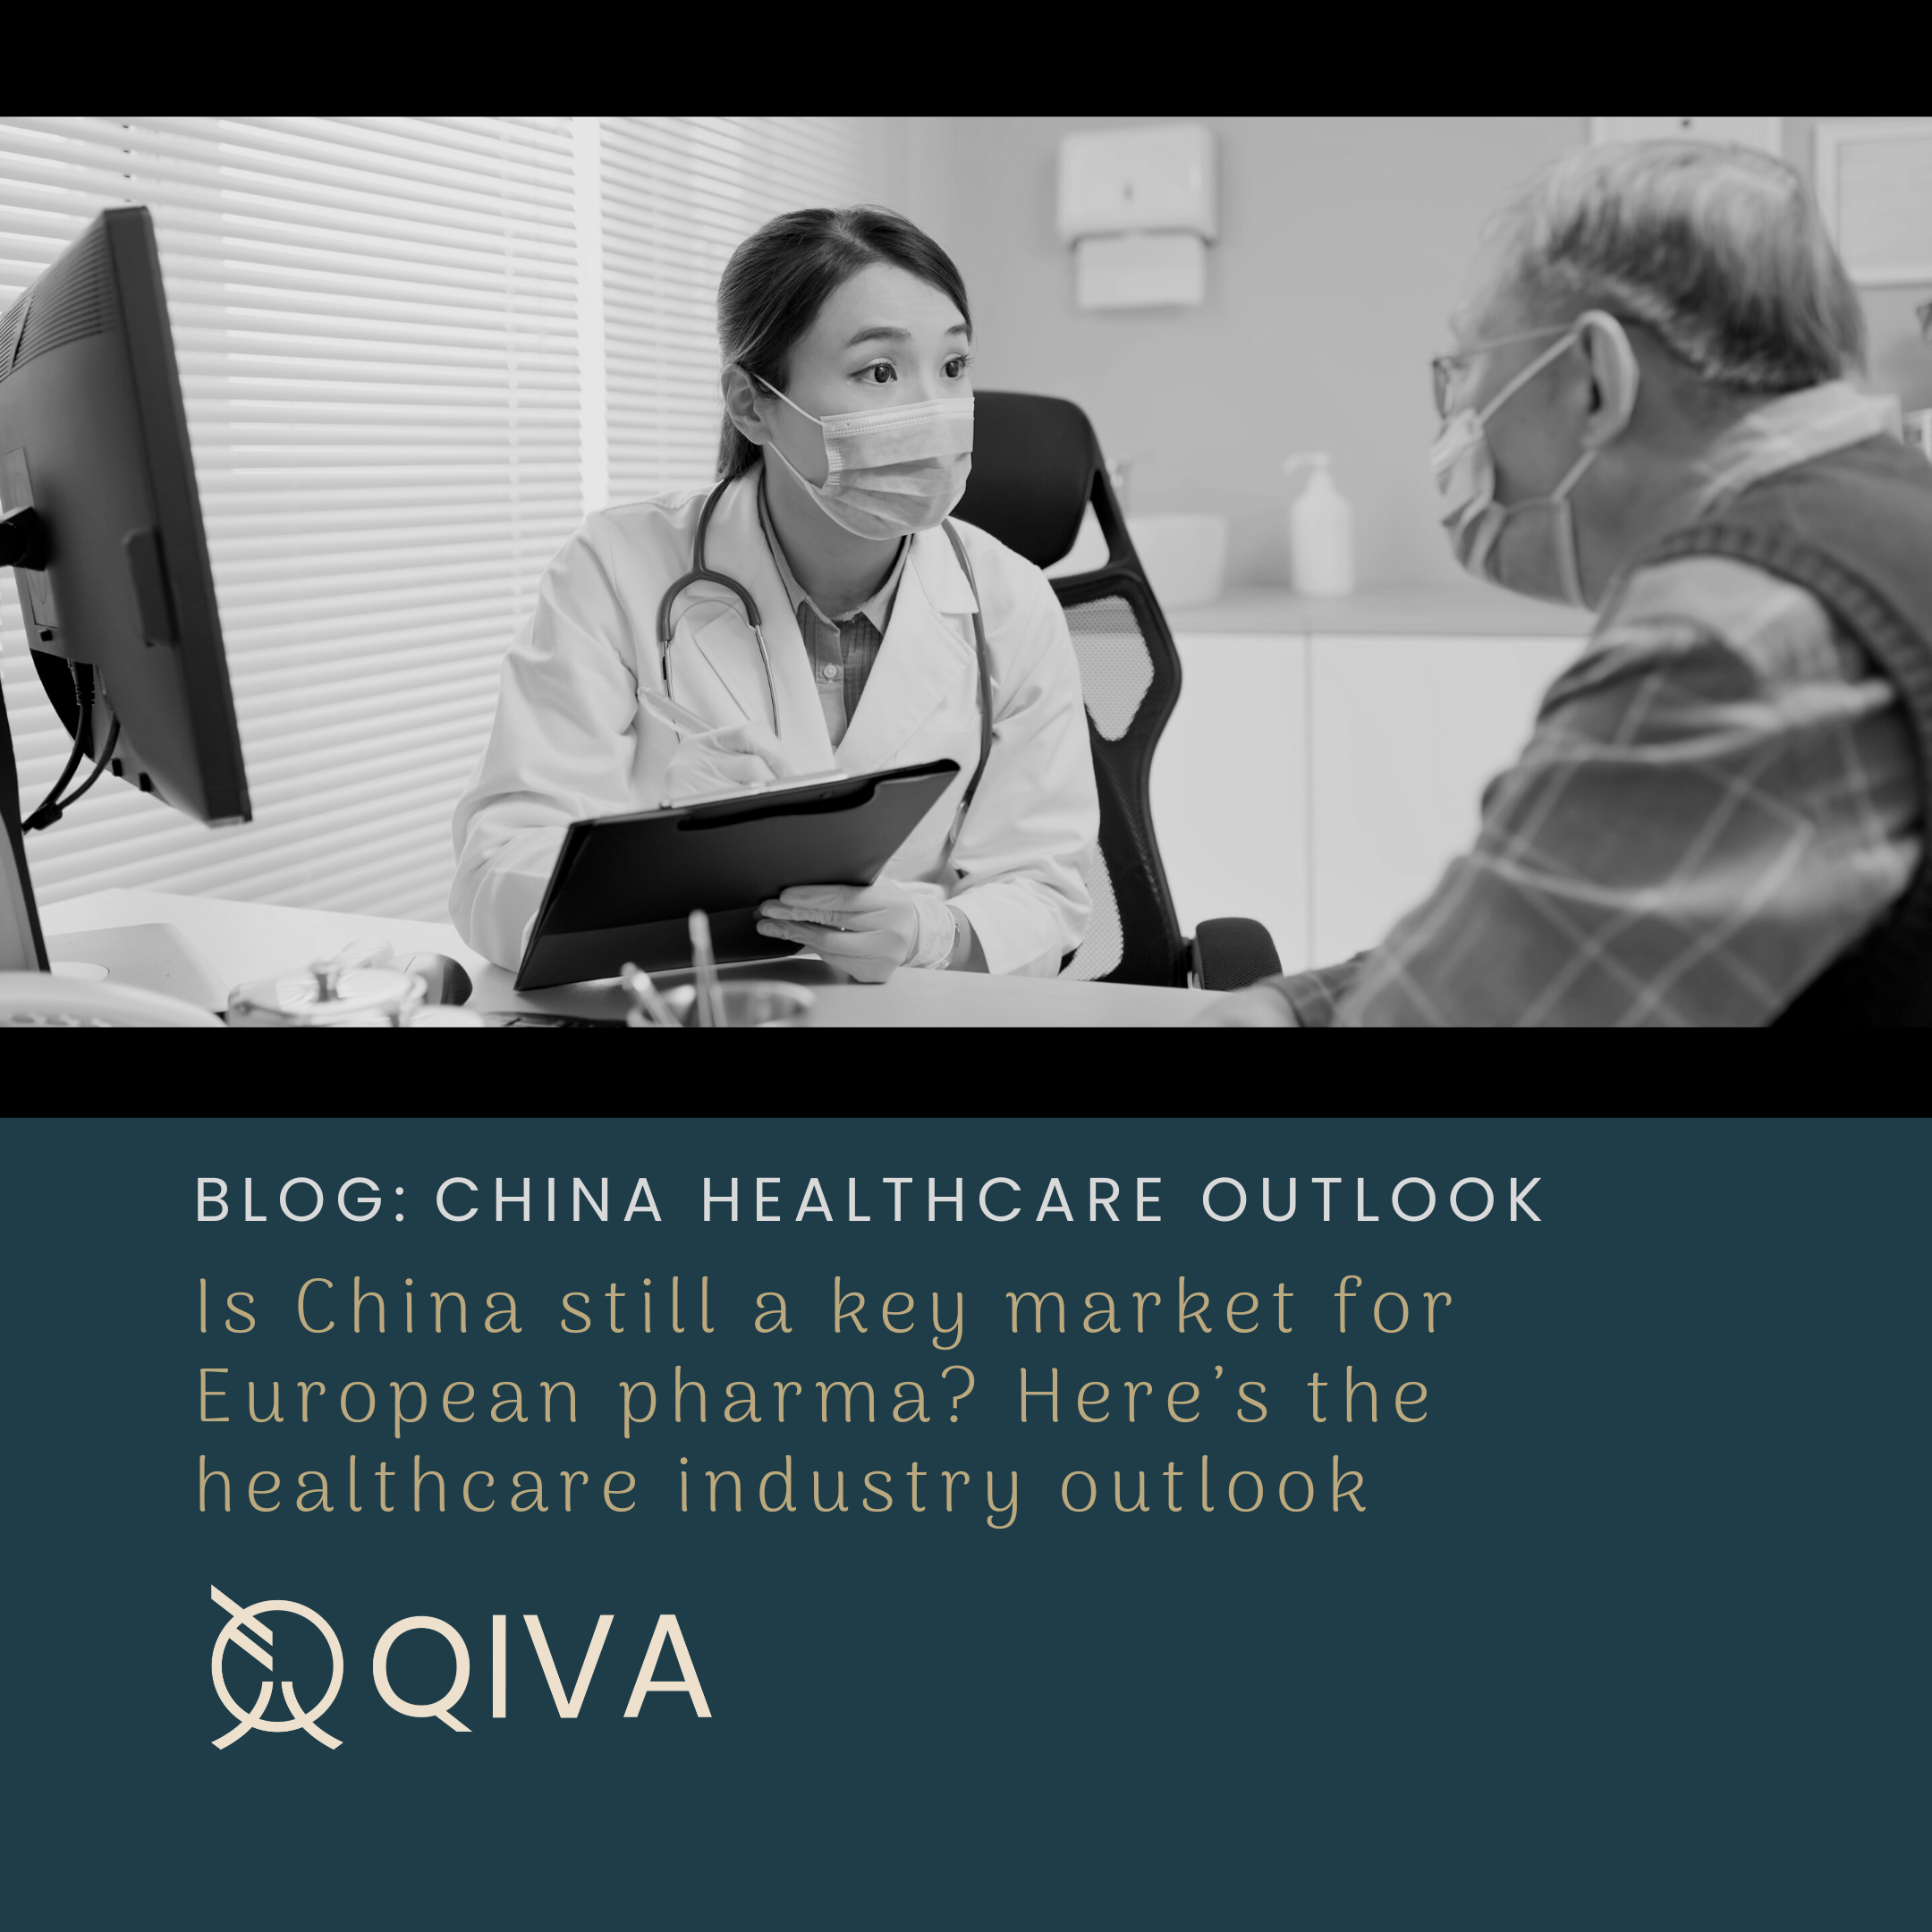 Is China still a key market for European pharma? Here’s the healthcare industry outlook